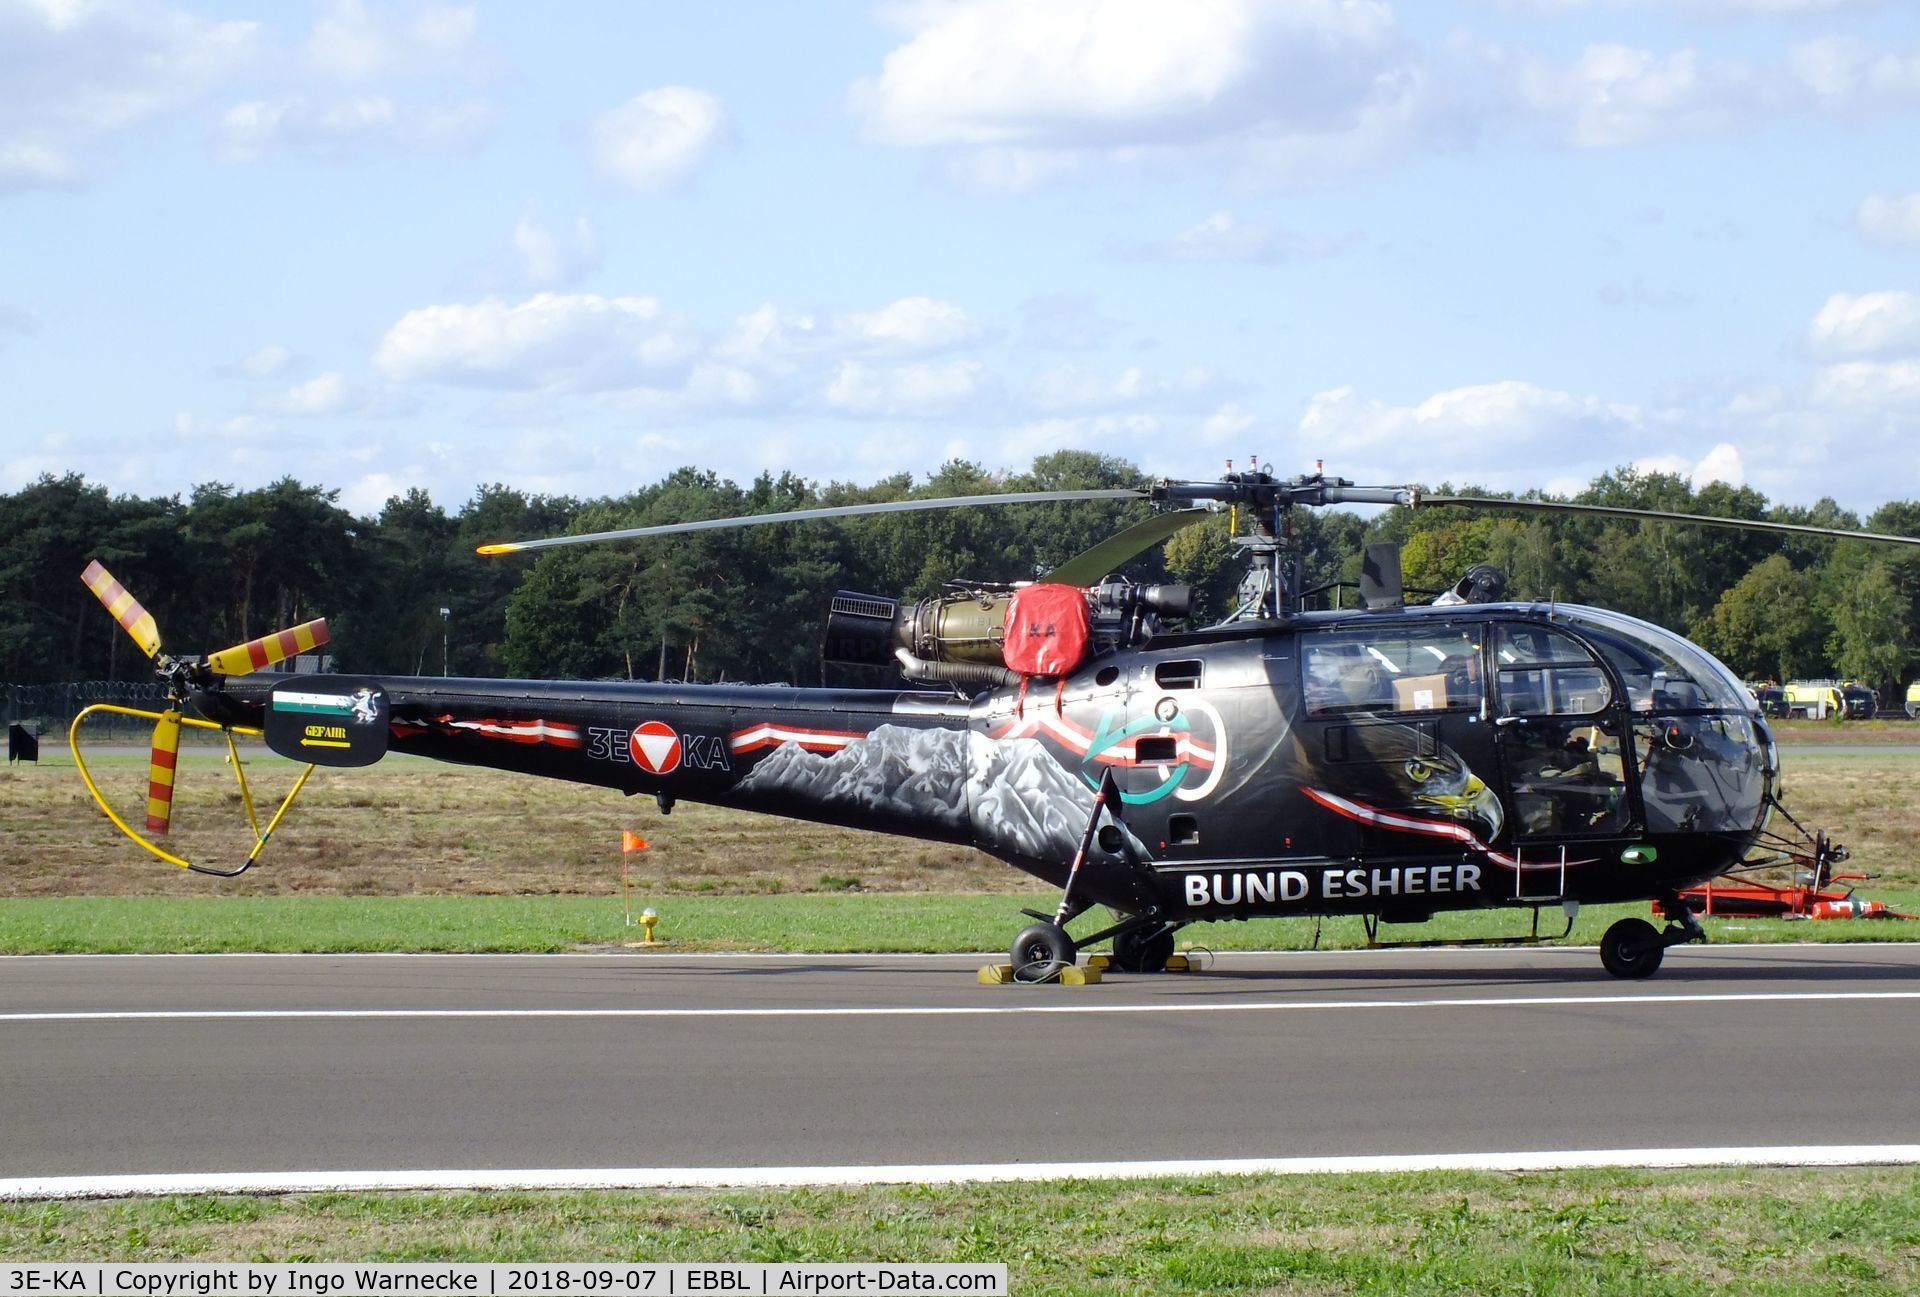 3E-KA, Aérospatiale SA-316B Alouette III C/N 1377, Aerospatiale SA.316B Alouette III of the Austrian Army (Bundesheer) in '50 years jubilee' special colours at the 2018 BAFD spotters day, Kleine Brogel airbase